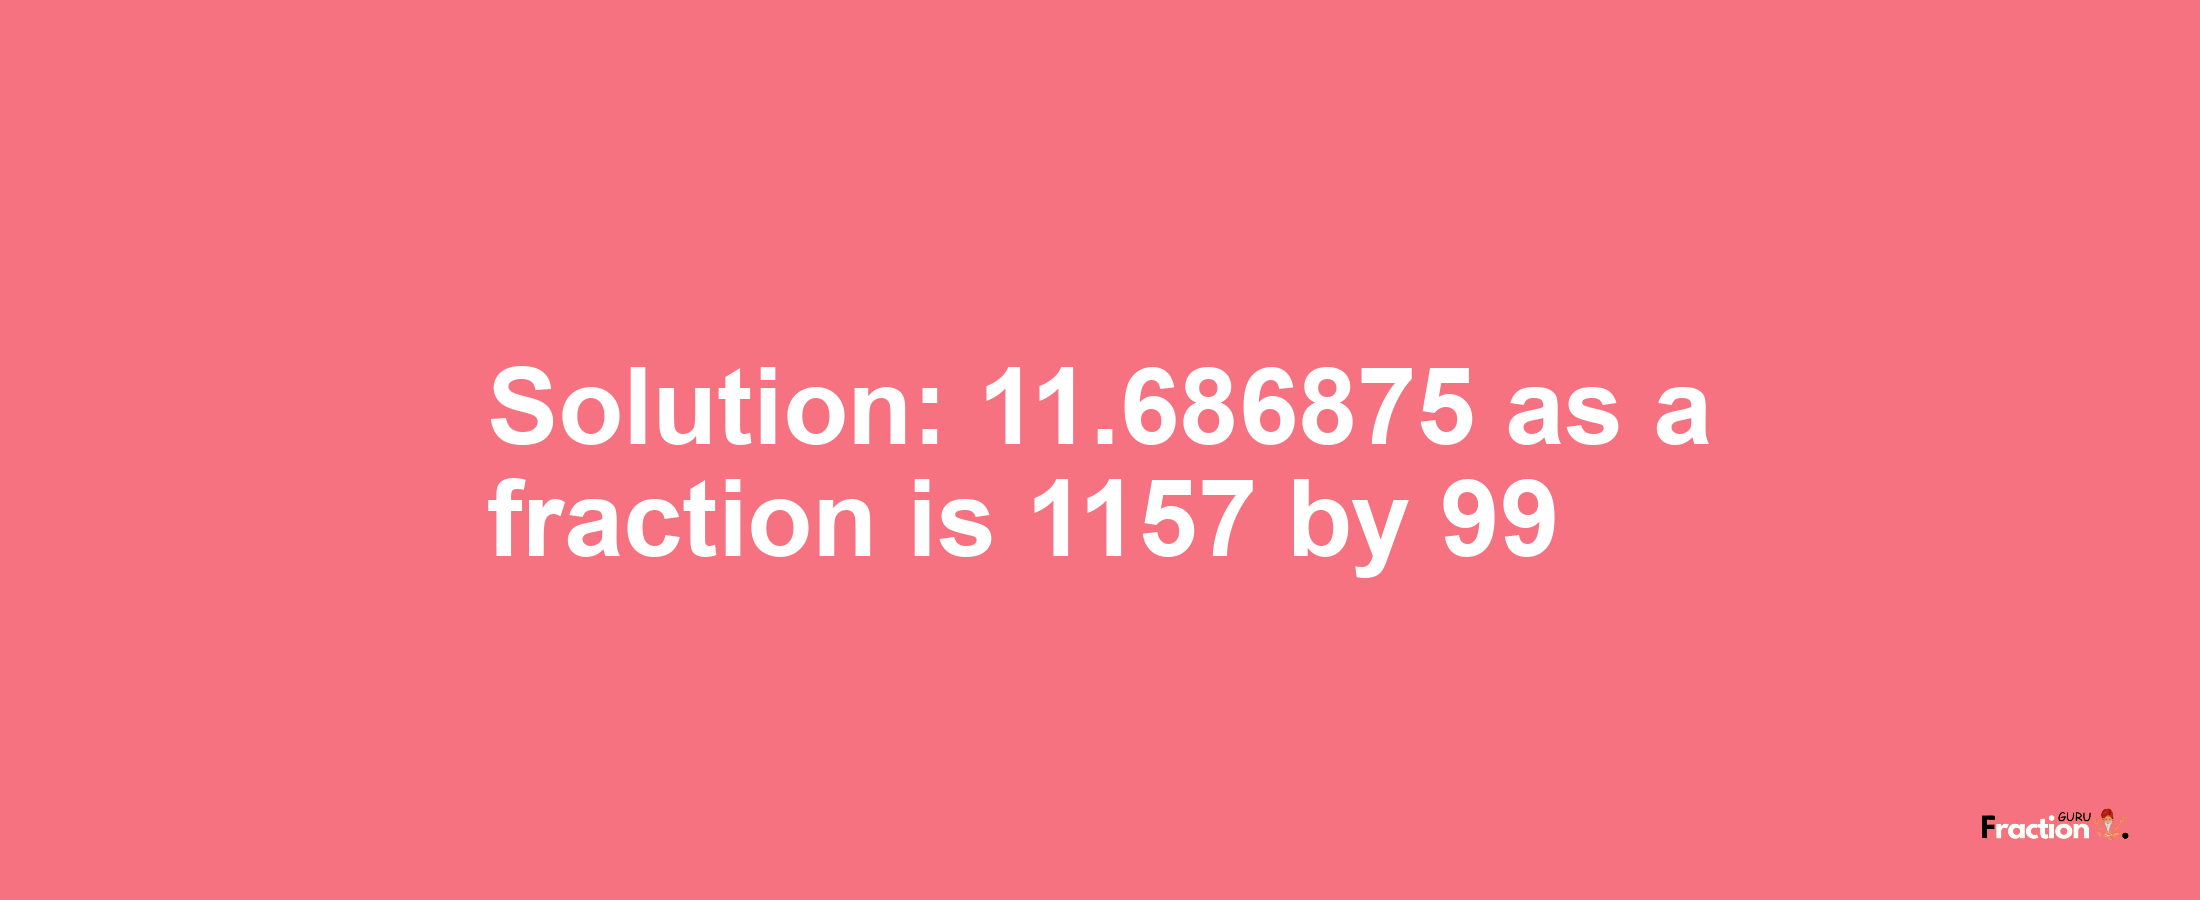 Solution:11.686875 as a fraction is 1157/99